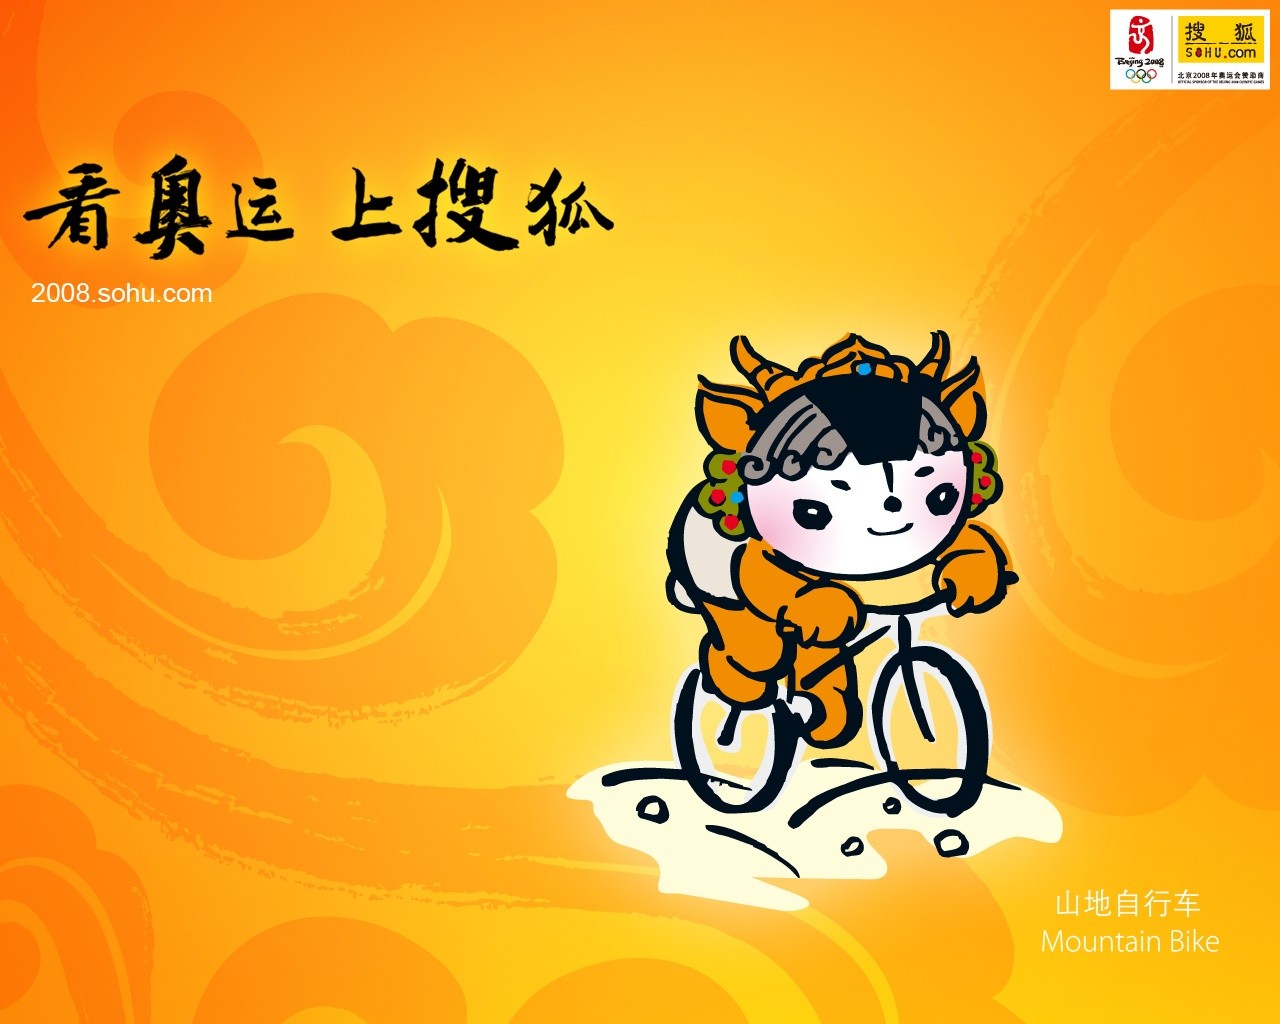 08 Olympic Games Fuwa Wallpapers #20 - 1280x1024